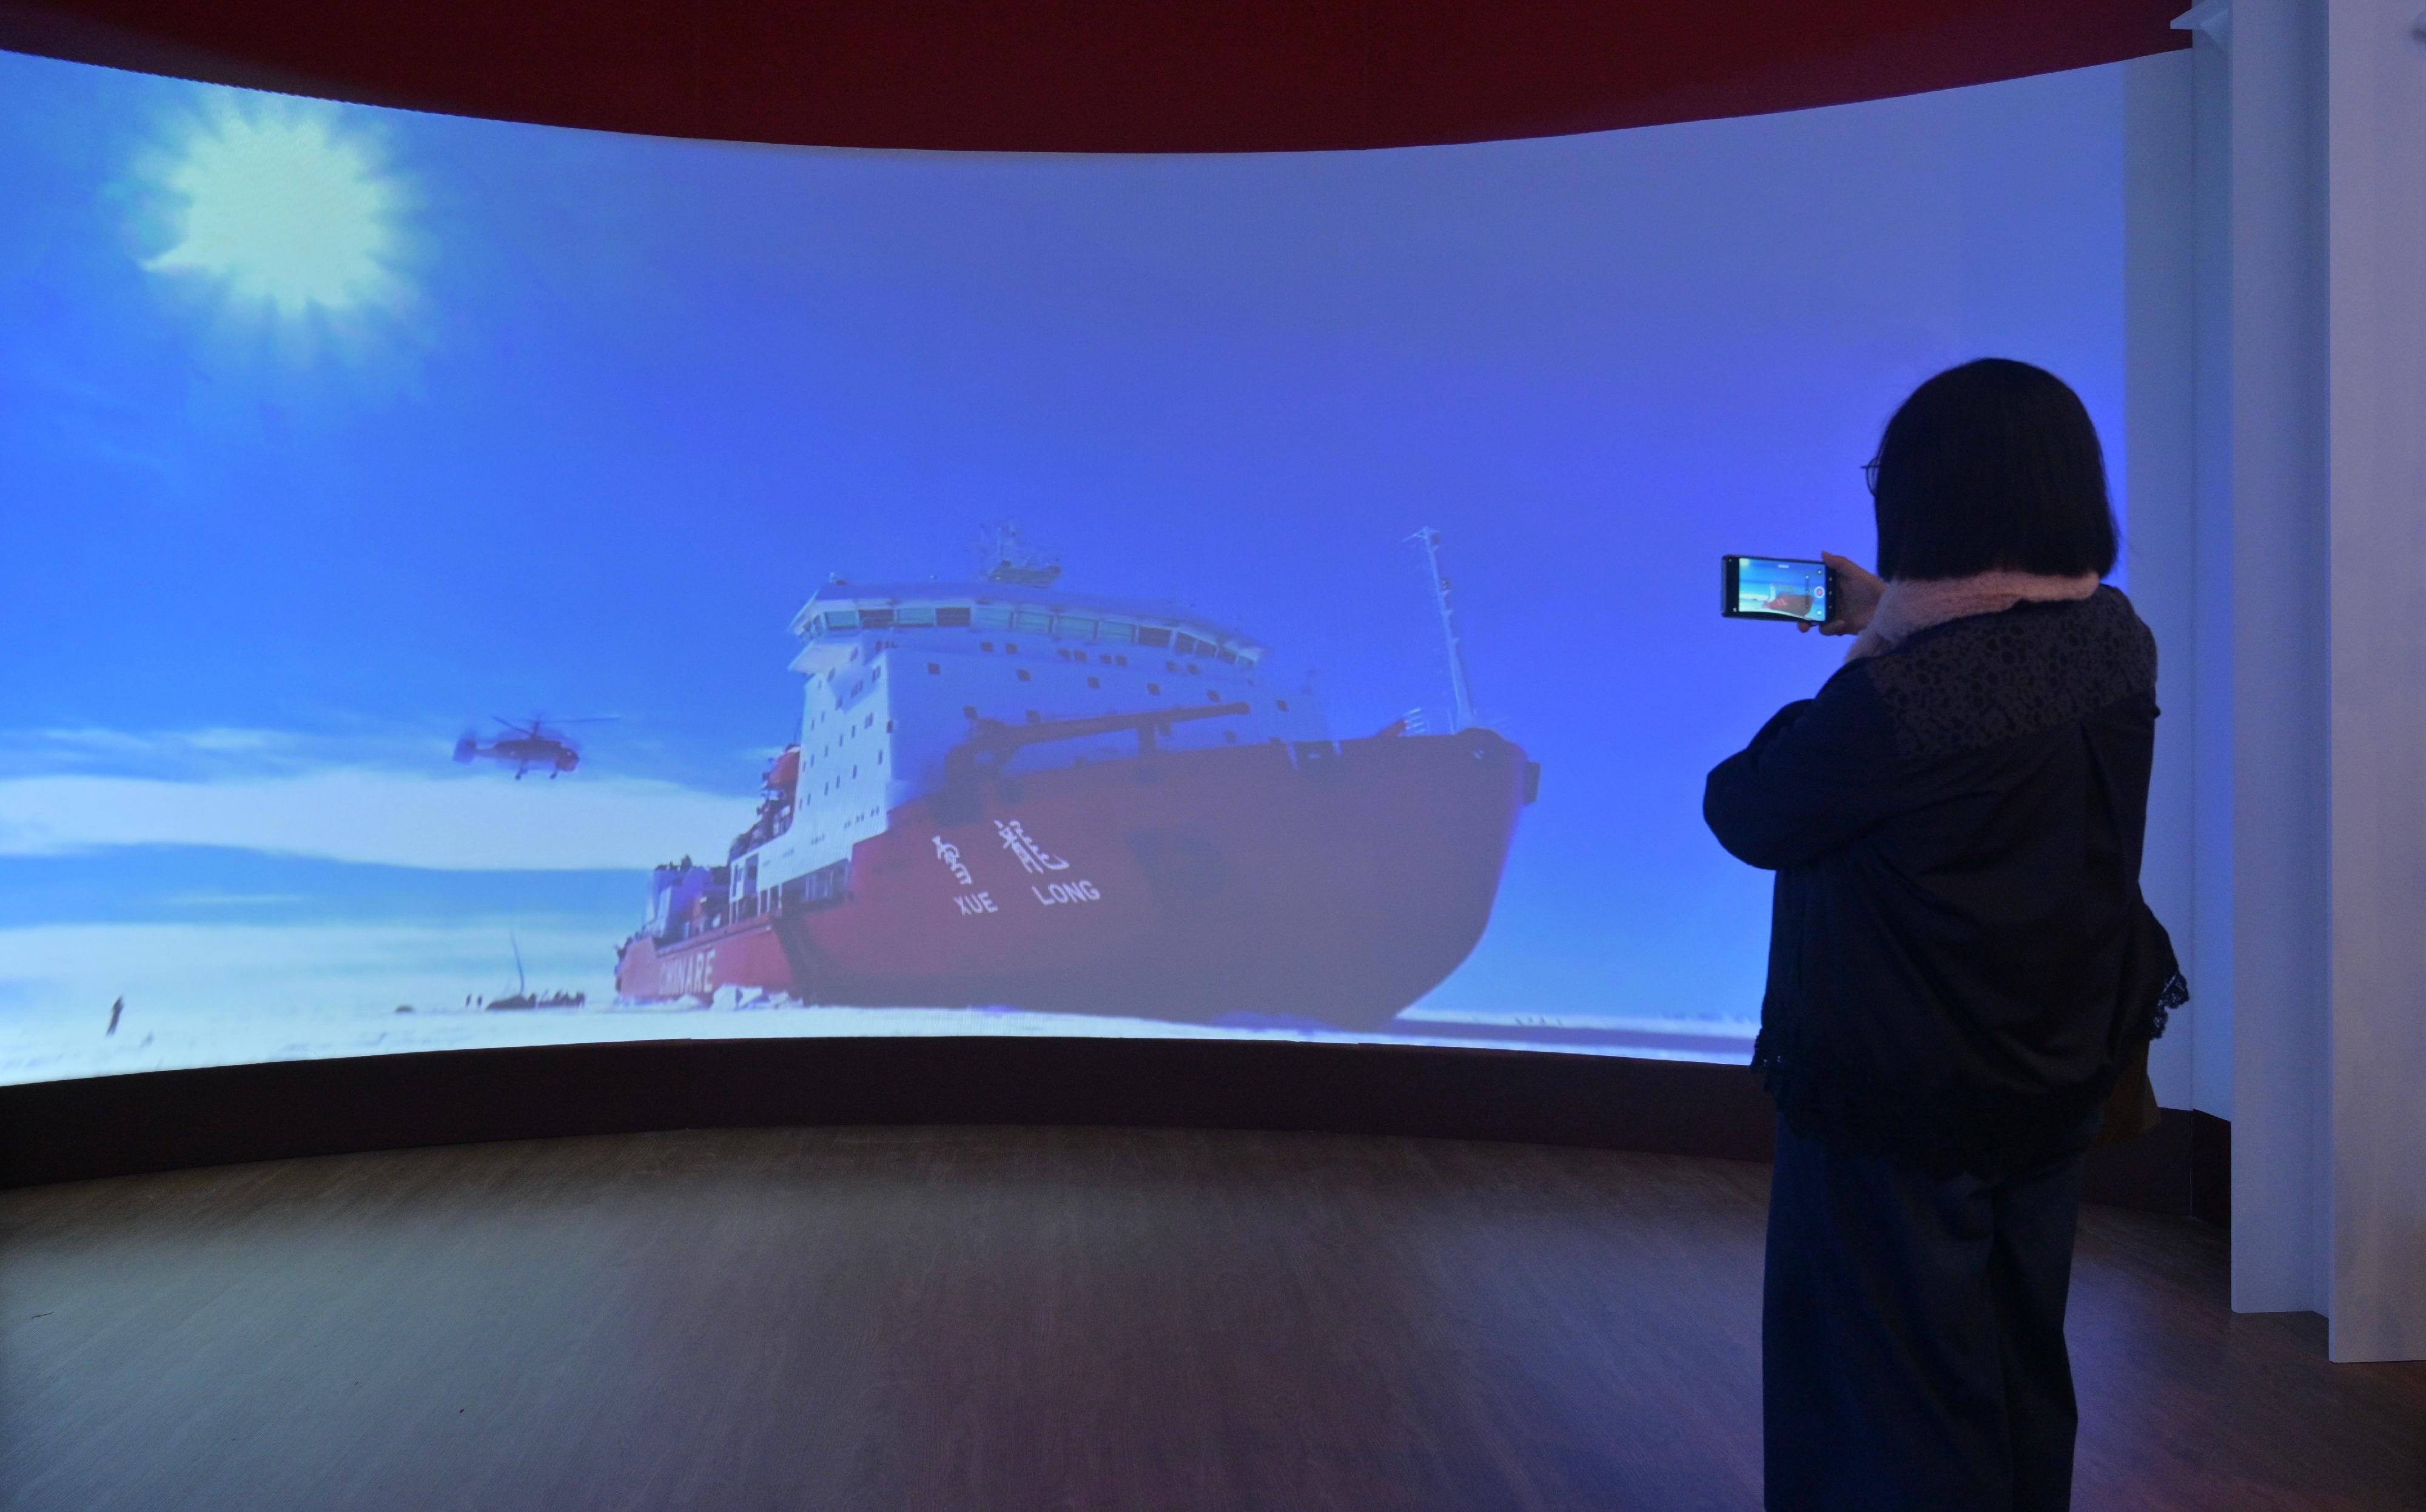 The Hong Kong Science Museum launched a new special exhibition, "Polar Research and Climate Change", today (March 18). Photo shows an exhibition area replicating the design of Xuelong 2, in which a large screen is set up to play videos of ice breaking in the polar regions, offering visitors an immersive experience.